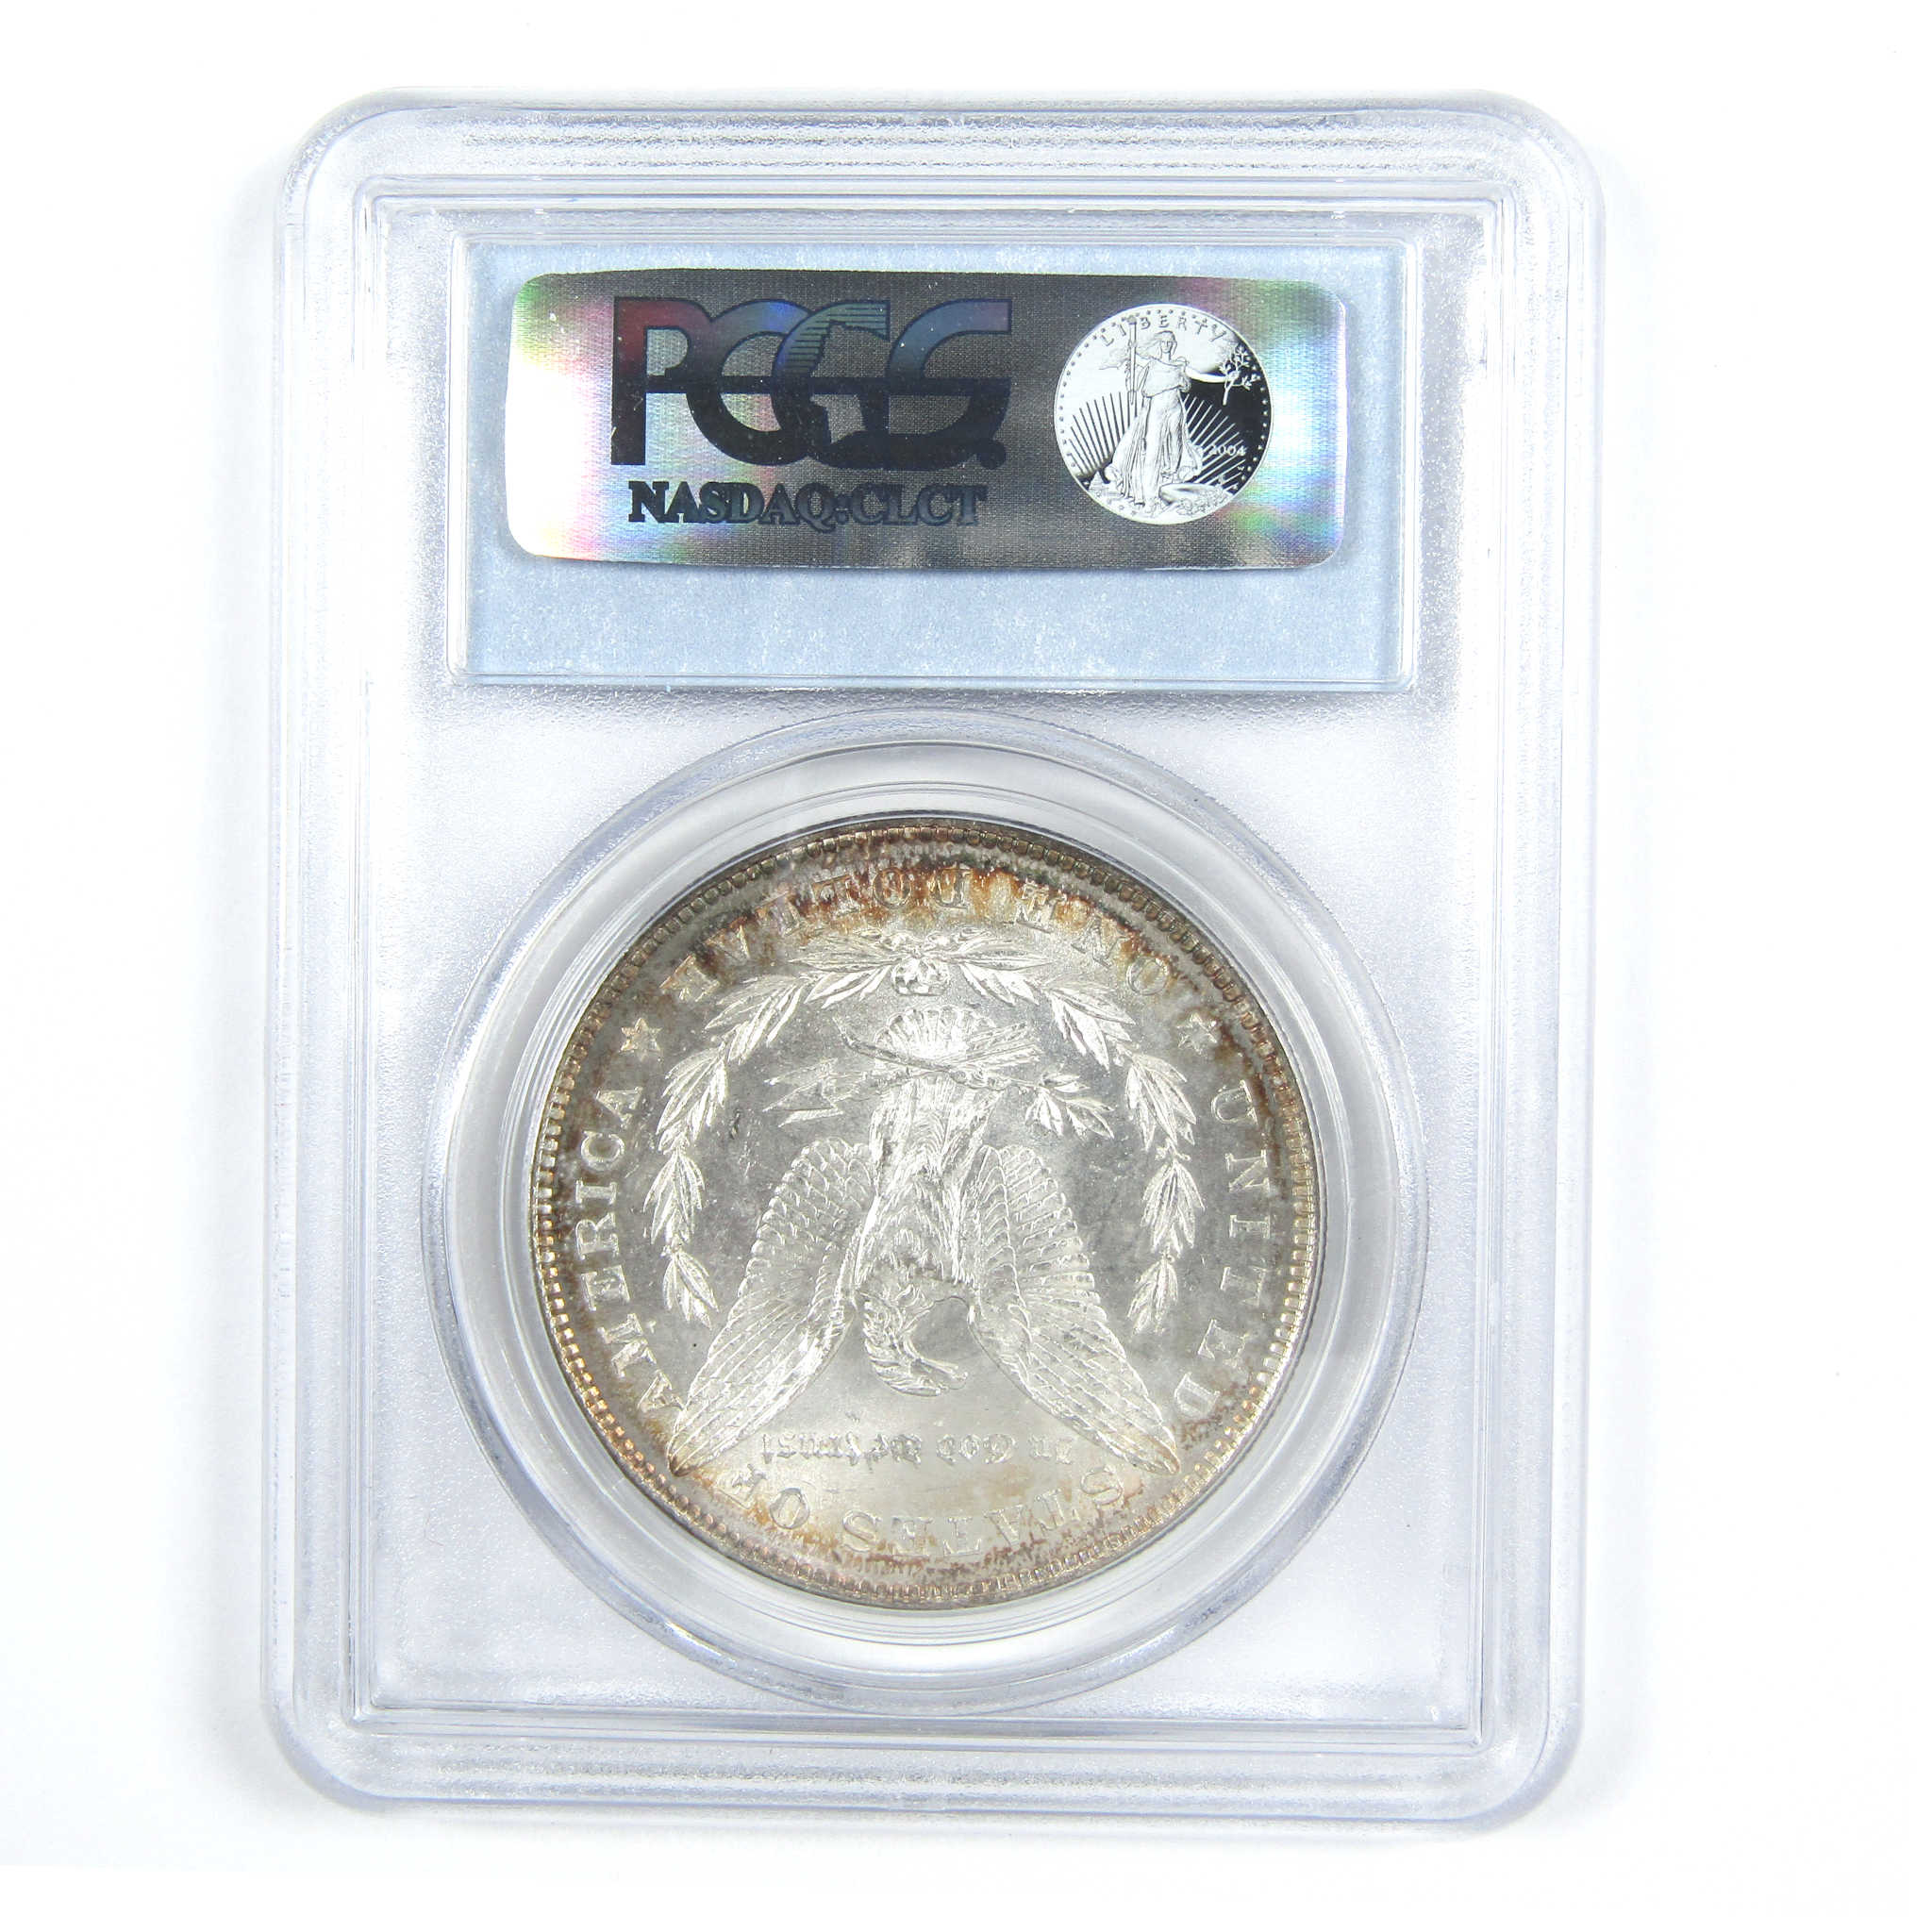 1878 7TF Rev 78 VAM-81 Polished Ear Morgan $1 MS 62 PCGS SKU:CPC7337 - Morgan coin - Morgan silver dollar - Morgan silver dollar for sale - Profile Coins &amp; Collectibles